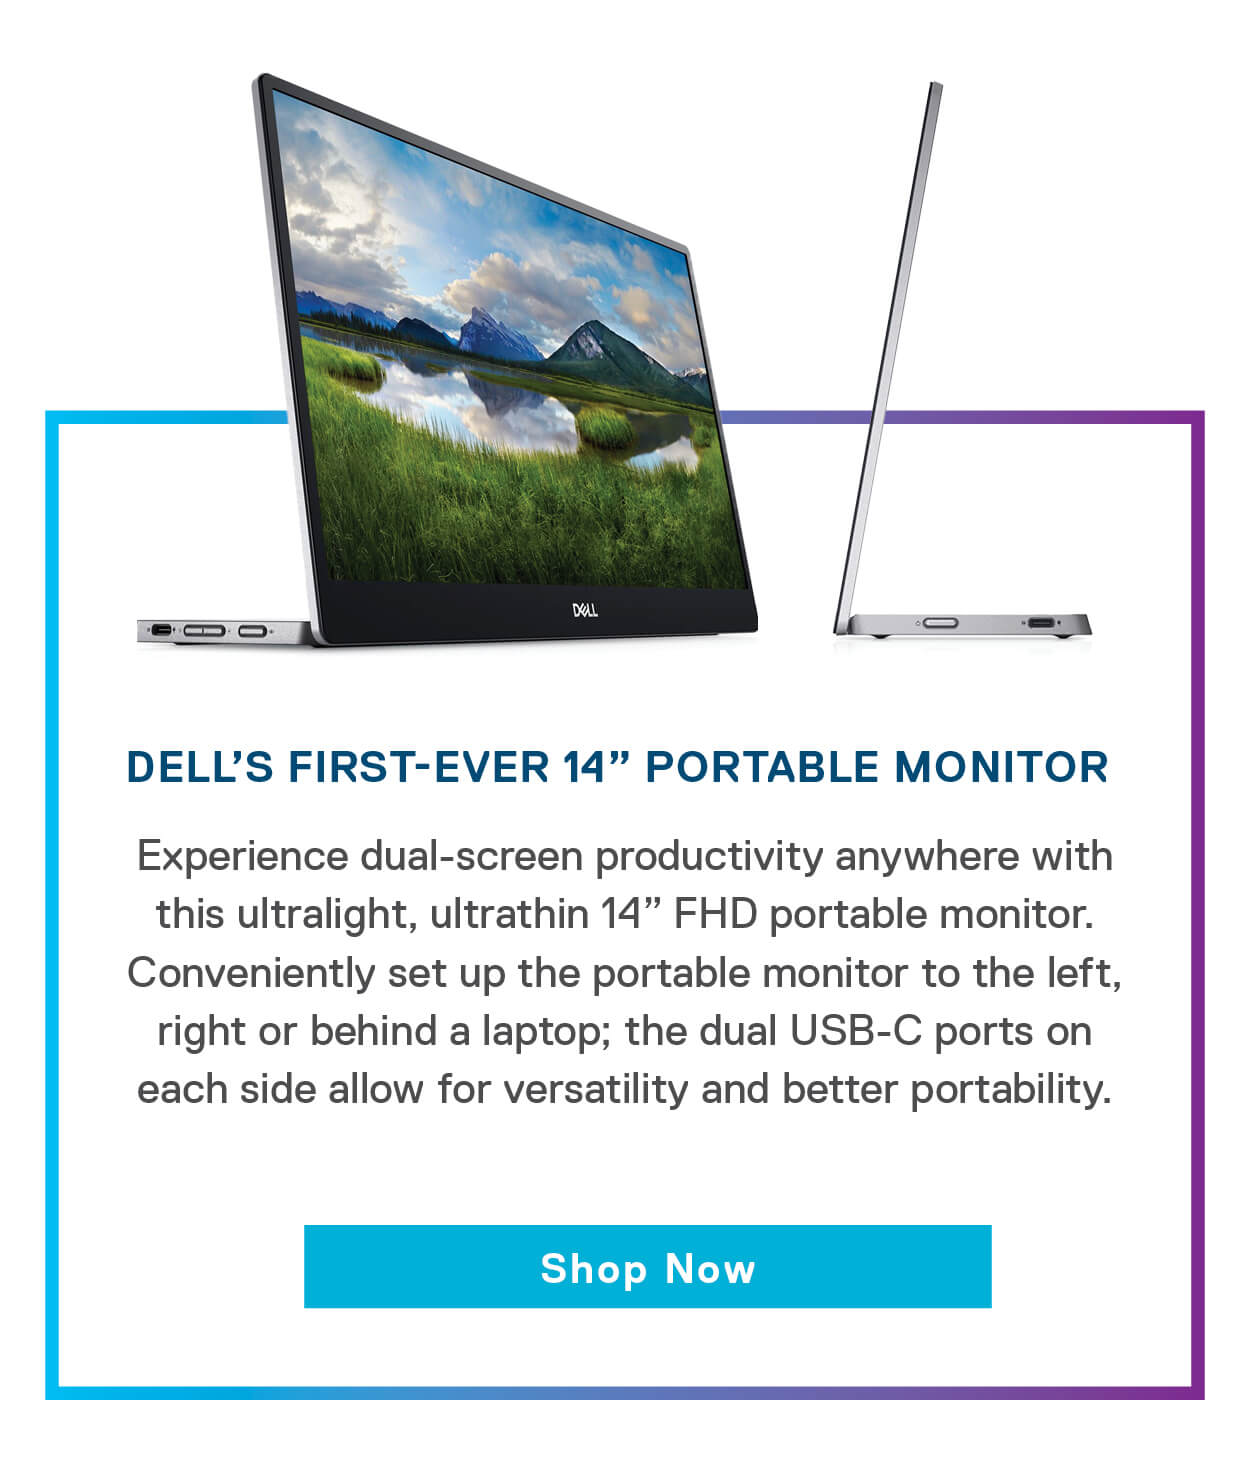 Dell’s first-ever 14 inch portable monitor.
Experience dual-screen productivity anywhere with this ultralight, ultrathin 14” FHD portable monitor. Conveniently set up the portable monitor to the left, right or behind a laptop; the dual USB-C ports on each side allow for versatility and better portability.